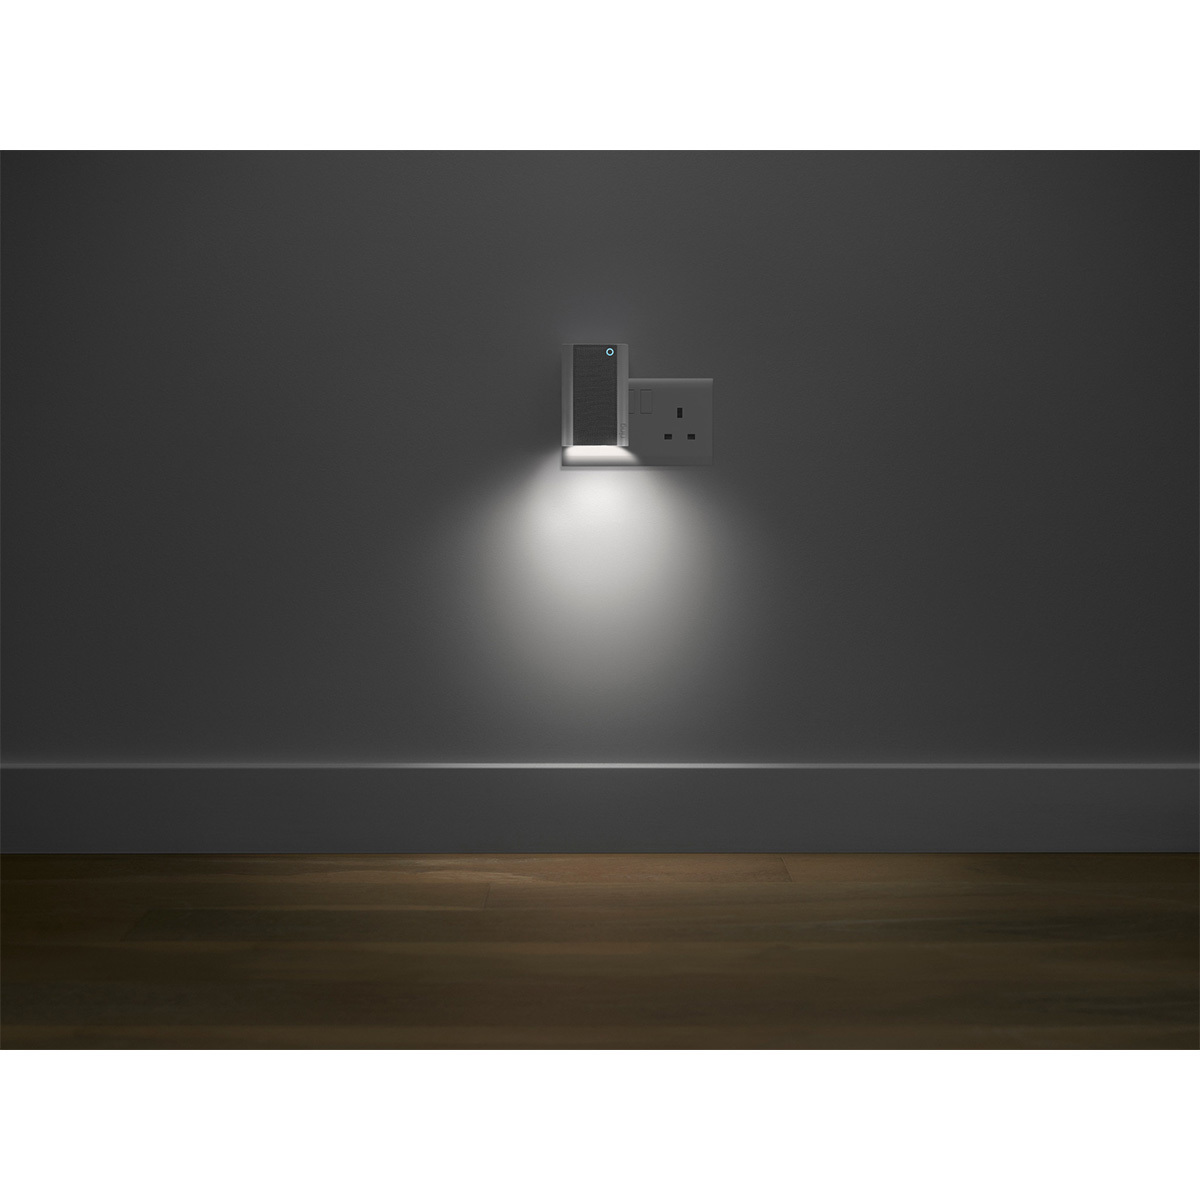 Lifestyle image of chime showcasing lighting feature